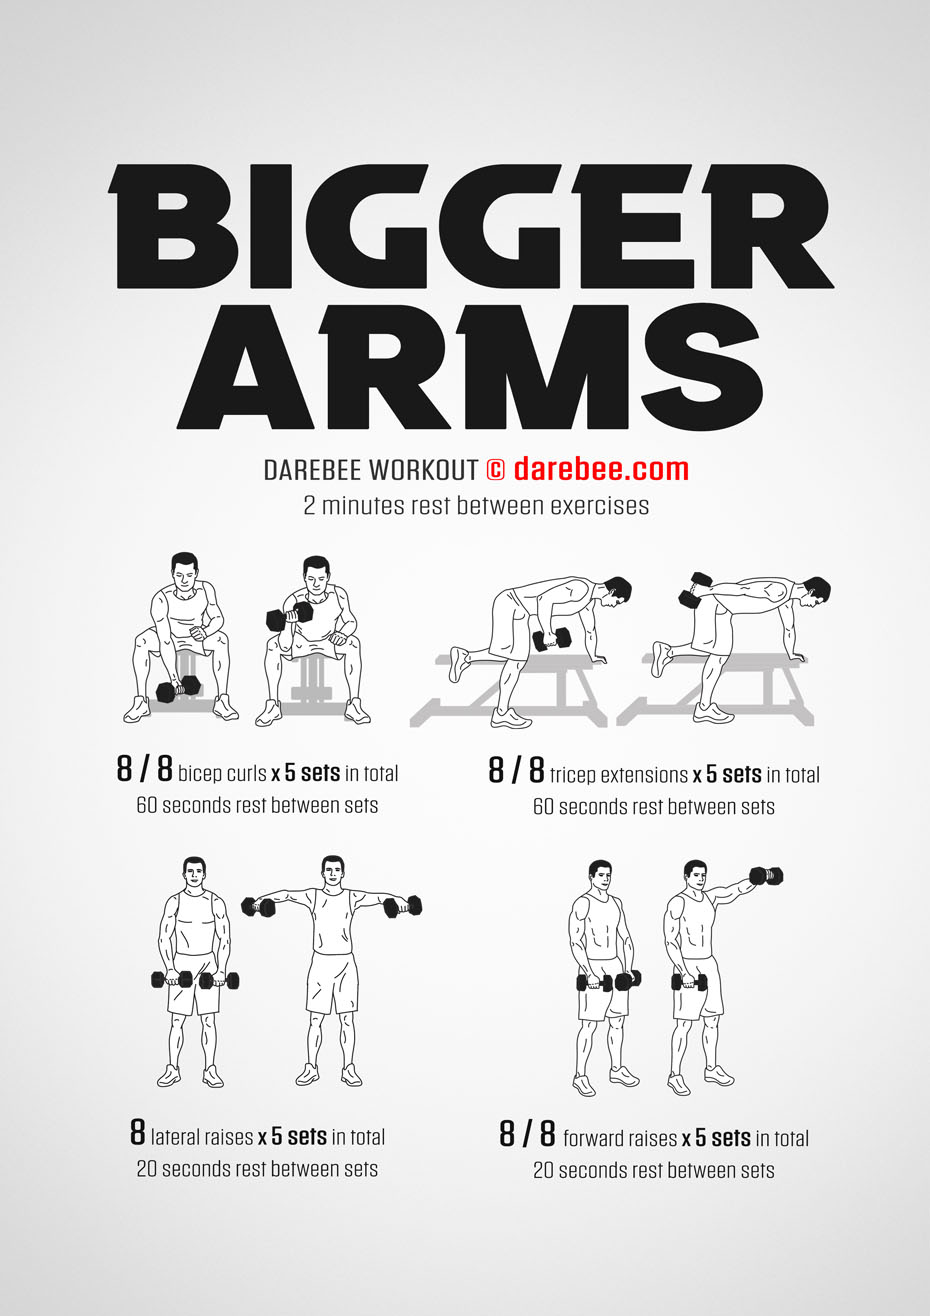 Bigger Arms is a dumbbells workout that's designed to activate the body's adaptive response and give you stronger, bigger arms.